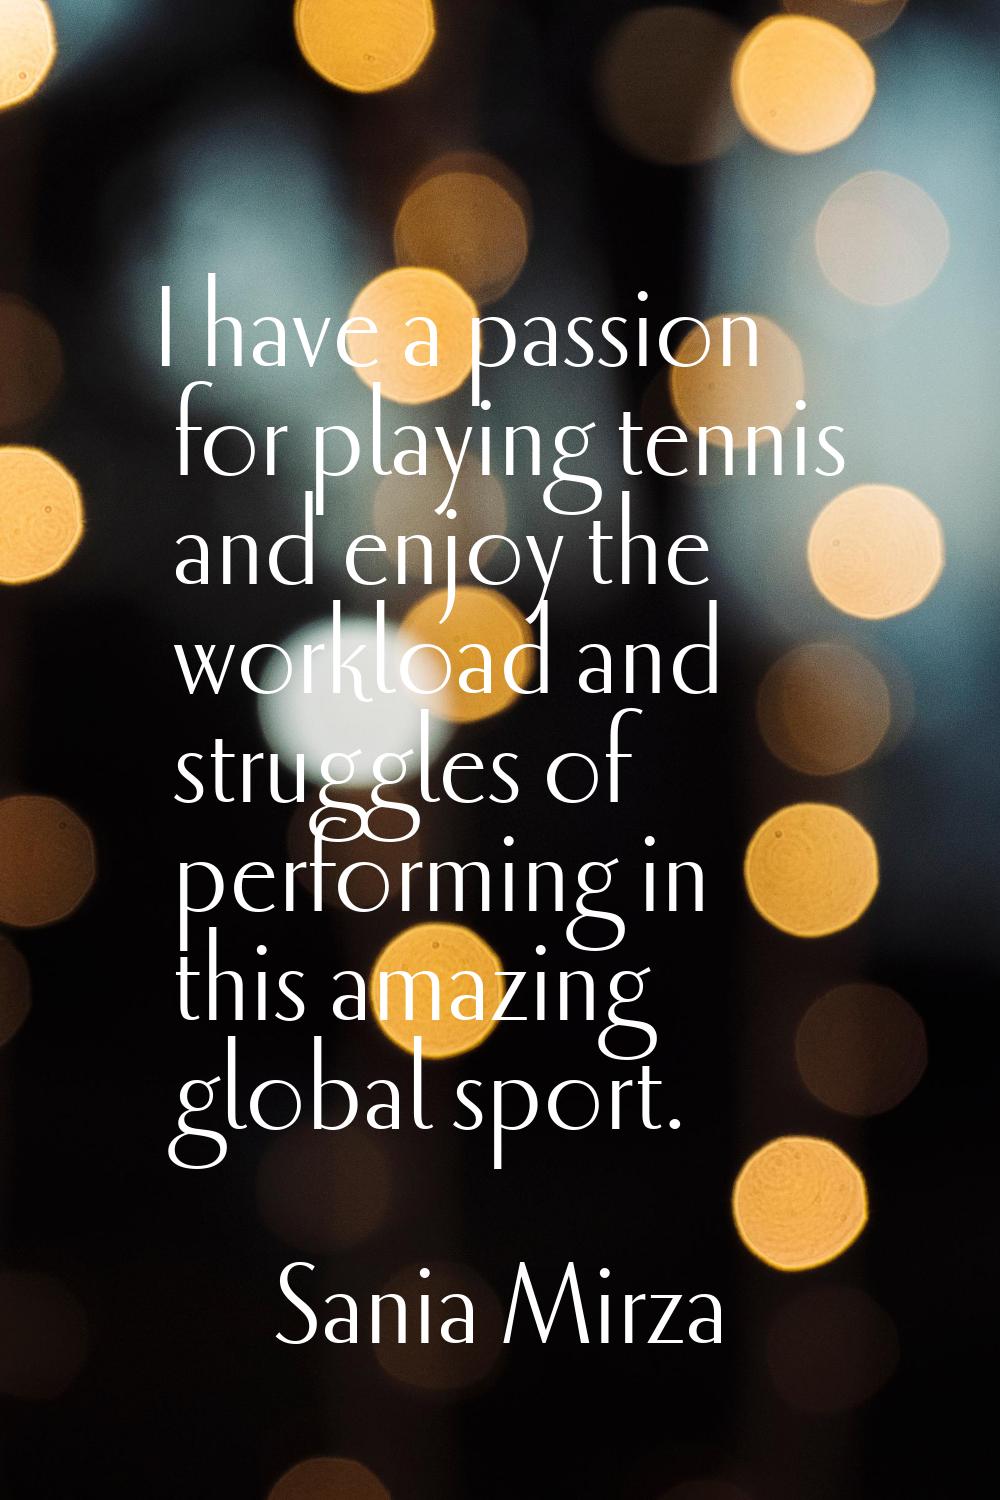 I have a passion for playing tennis and enjoy the workload and struggles of performing in this amaz